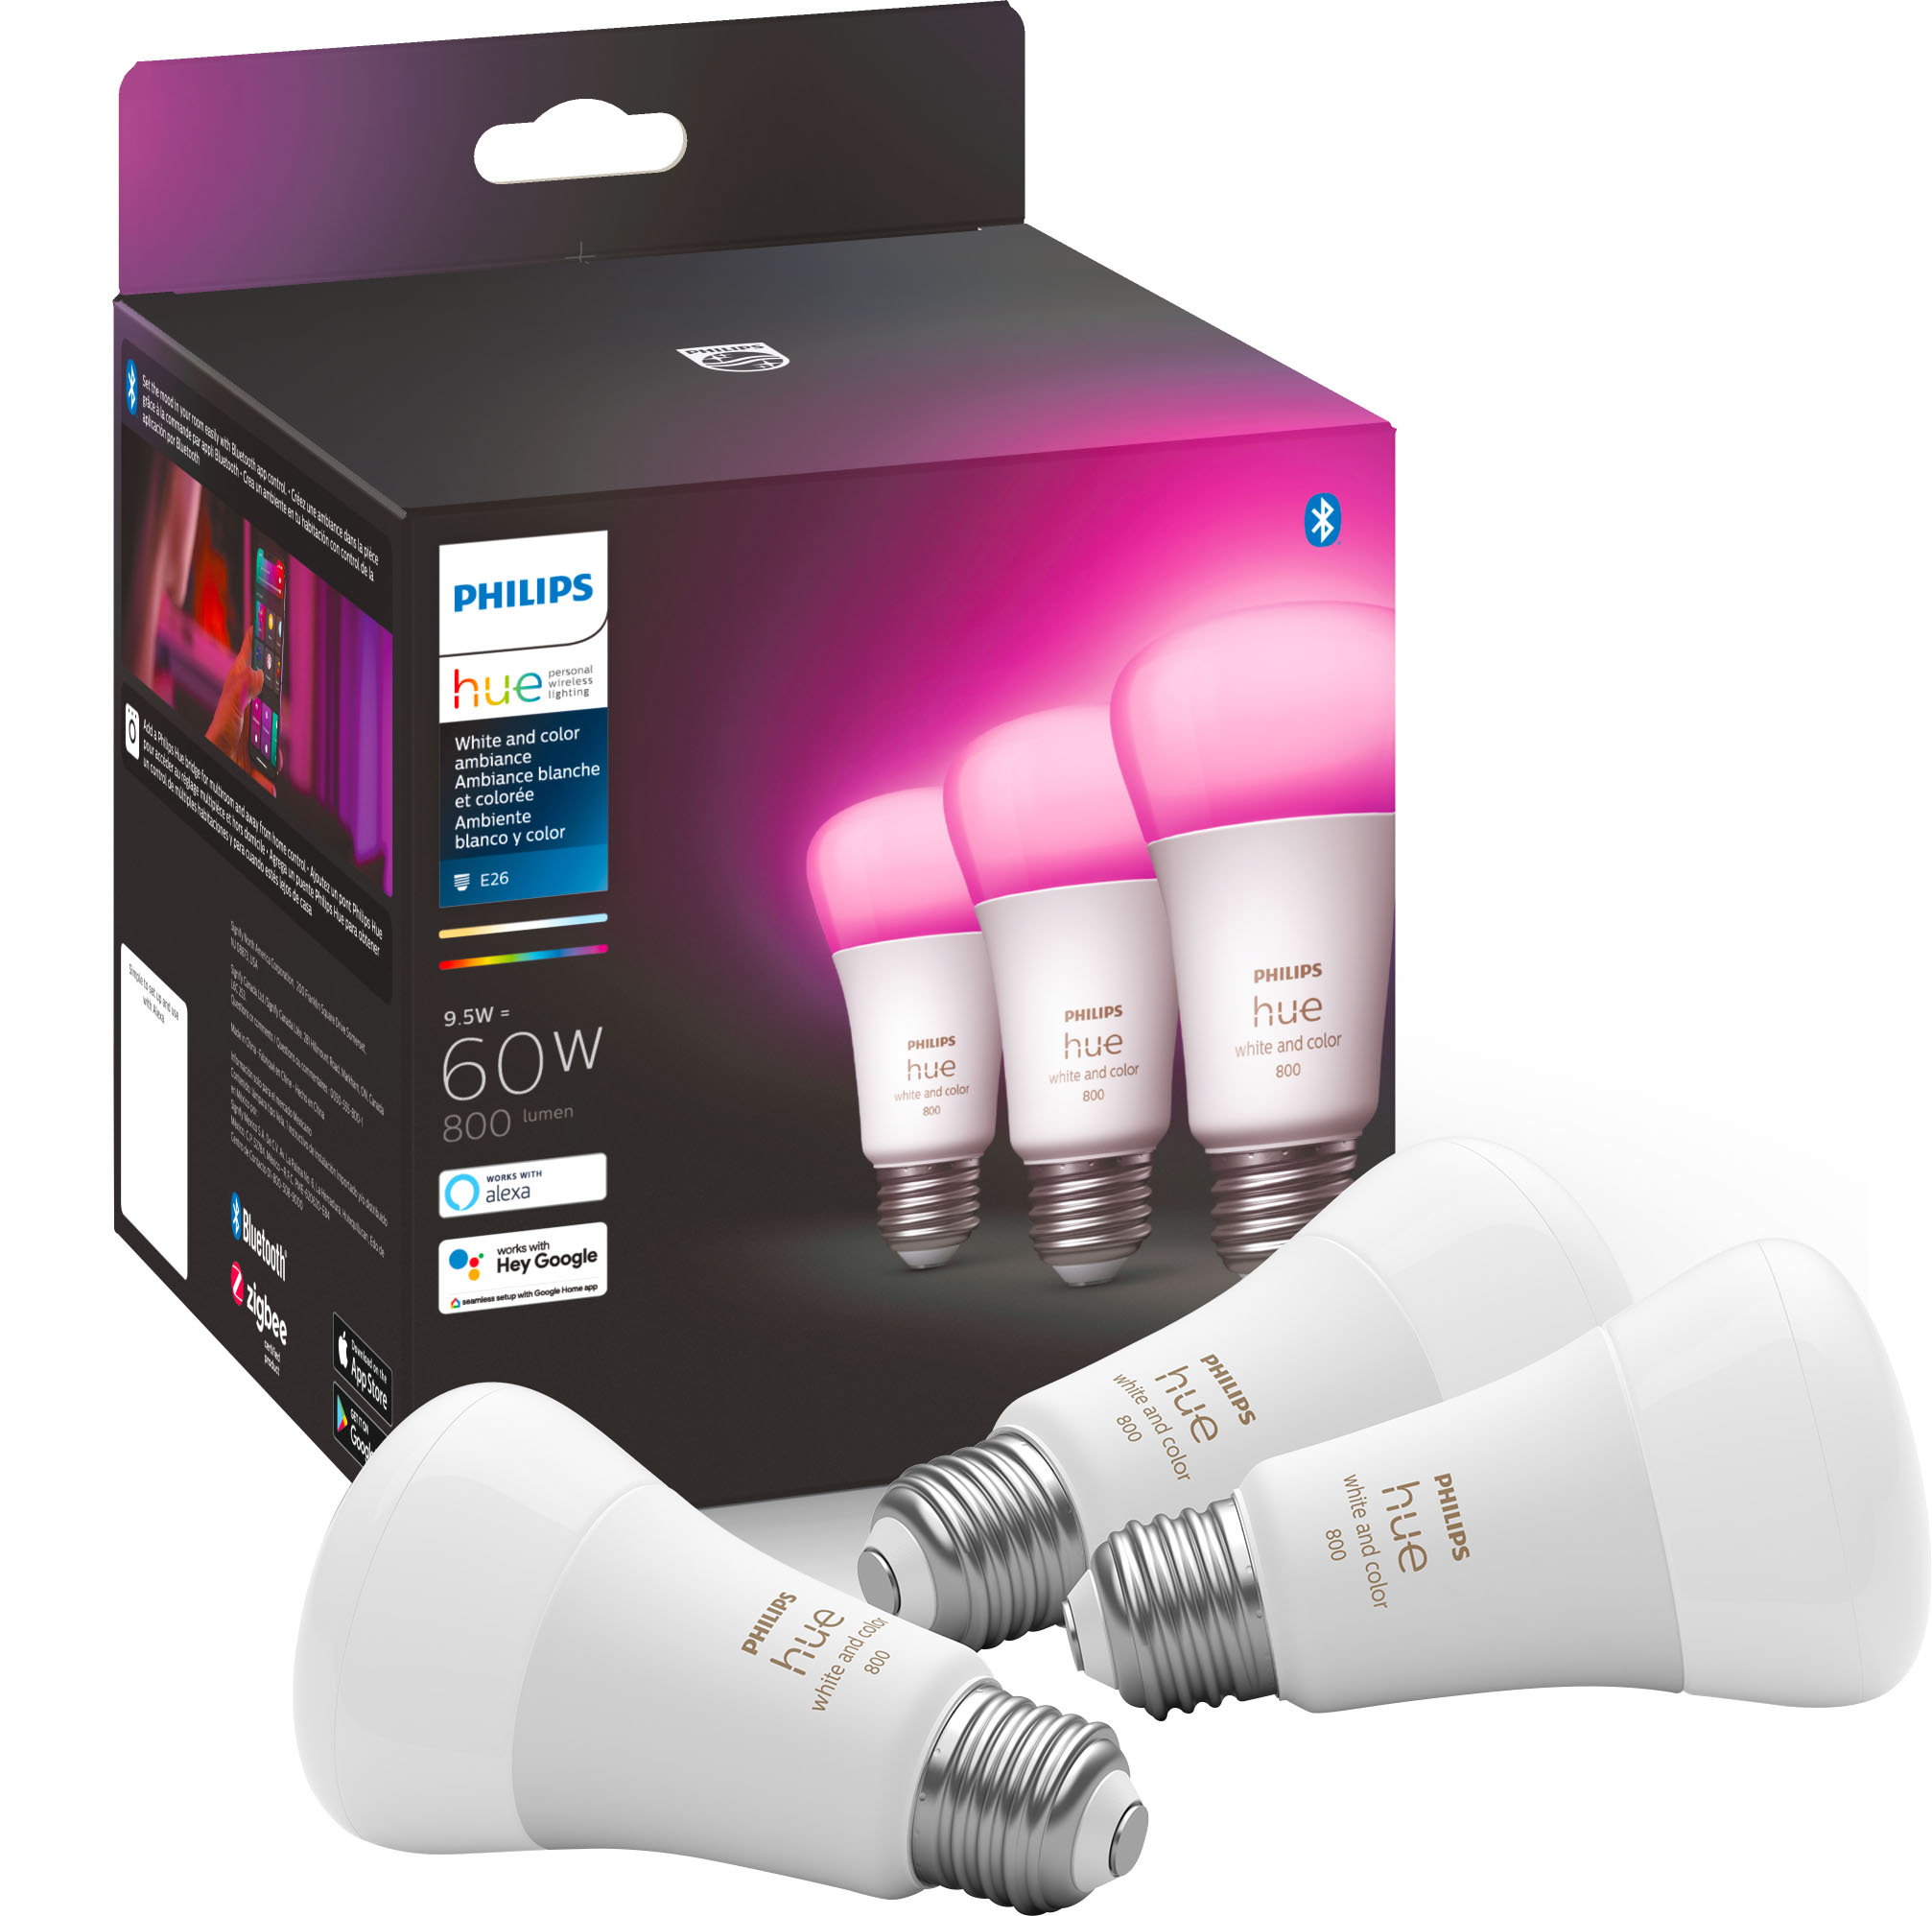 Phillips Hue White and Color Ambiance A19 Starter Kit 